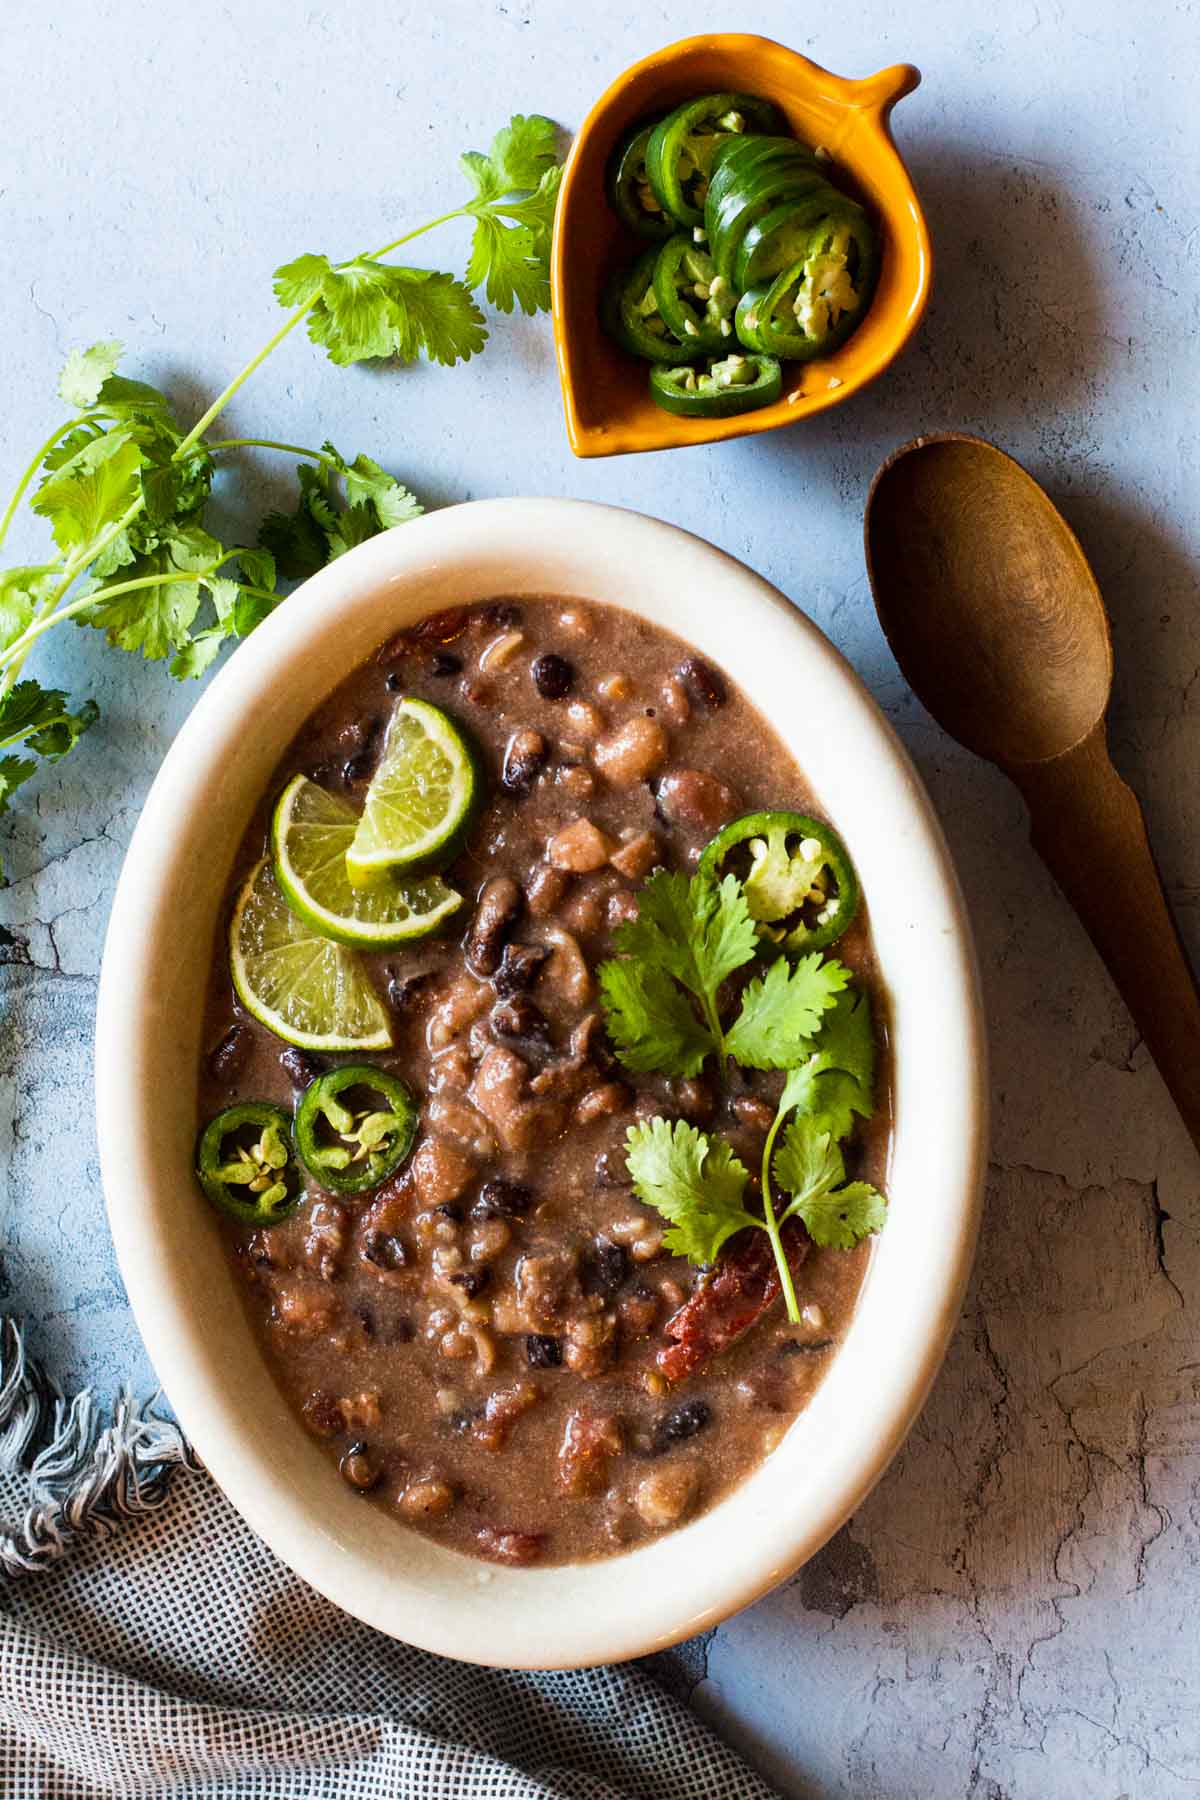 Cowboy Baked Beans recipe served in a white oval dish.